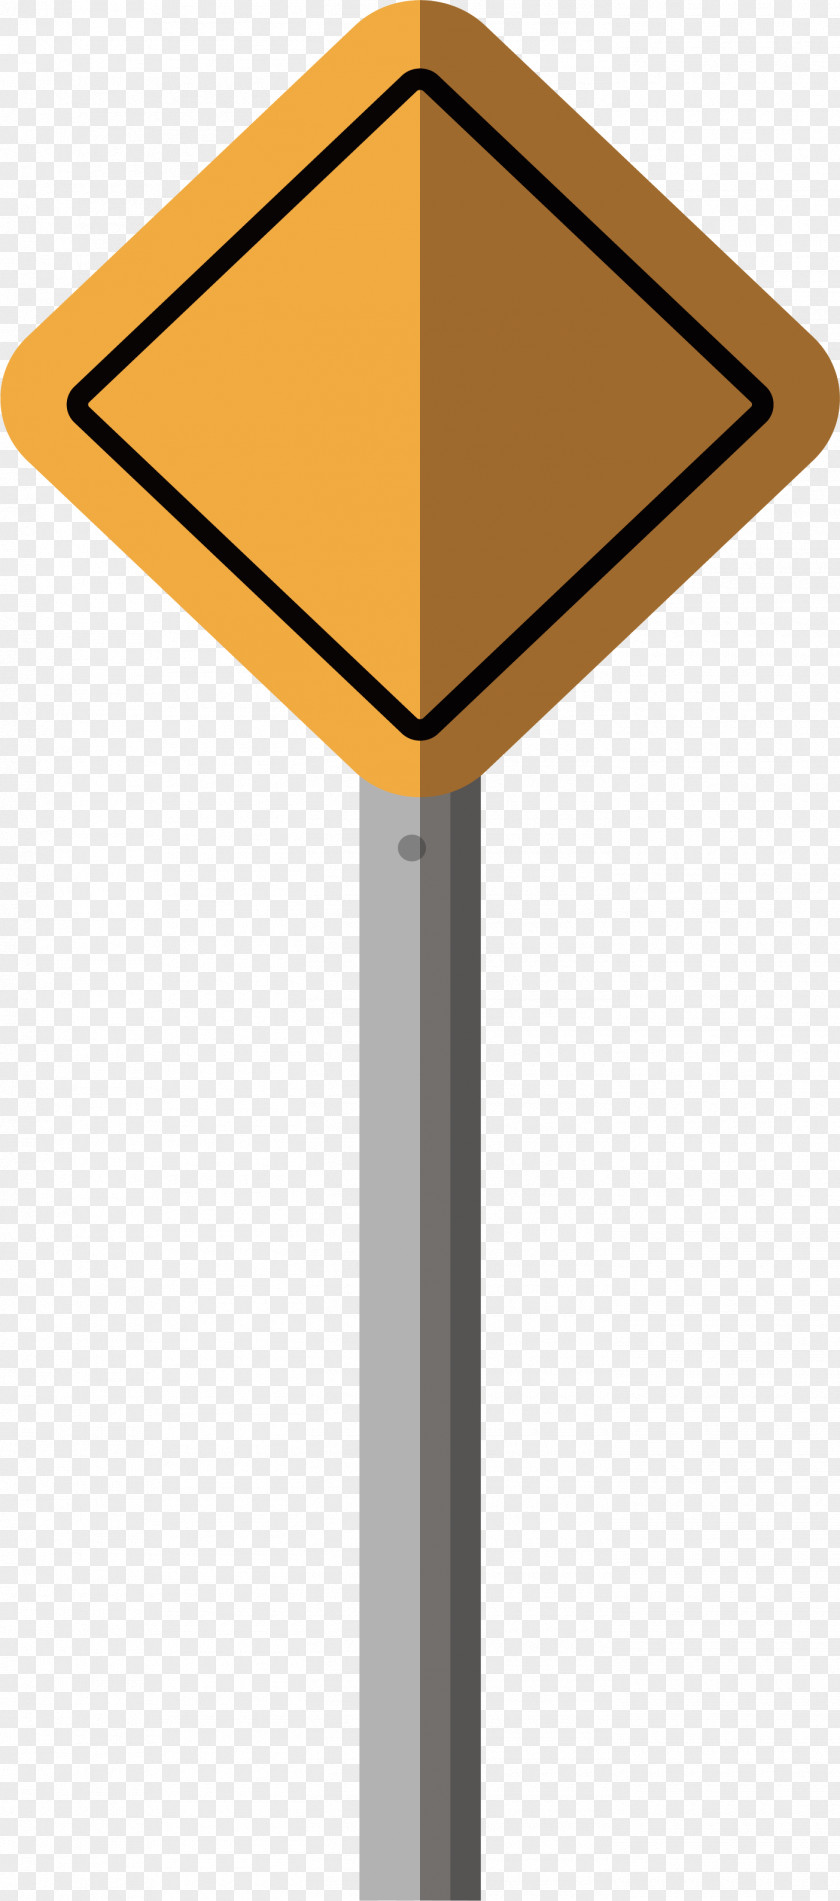 Yellow Quadrilateral Traffic Sign PNG